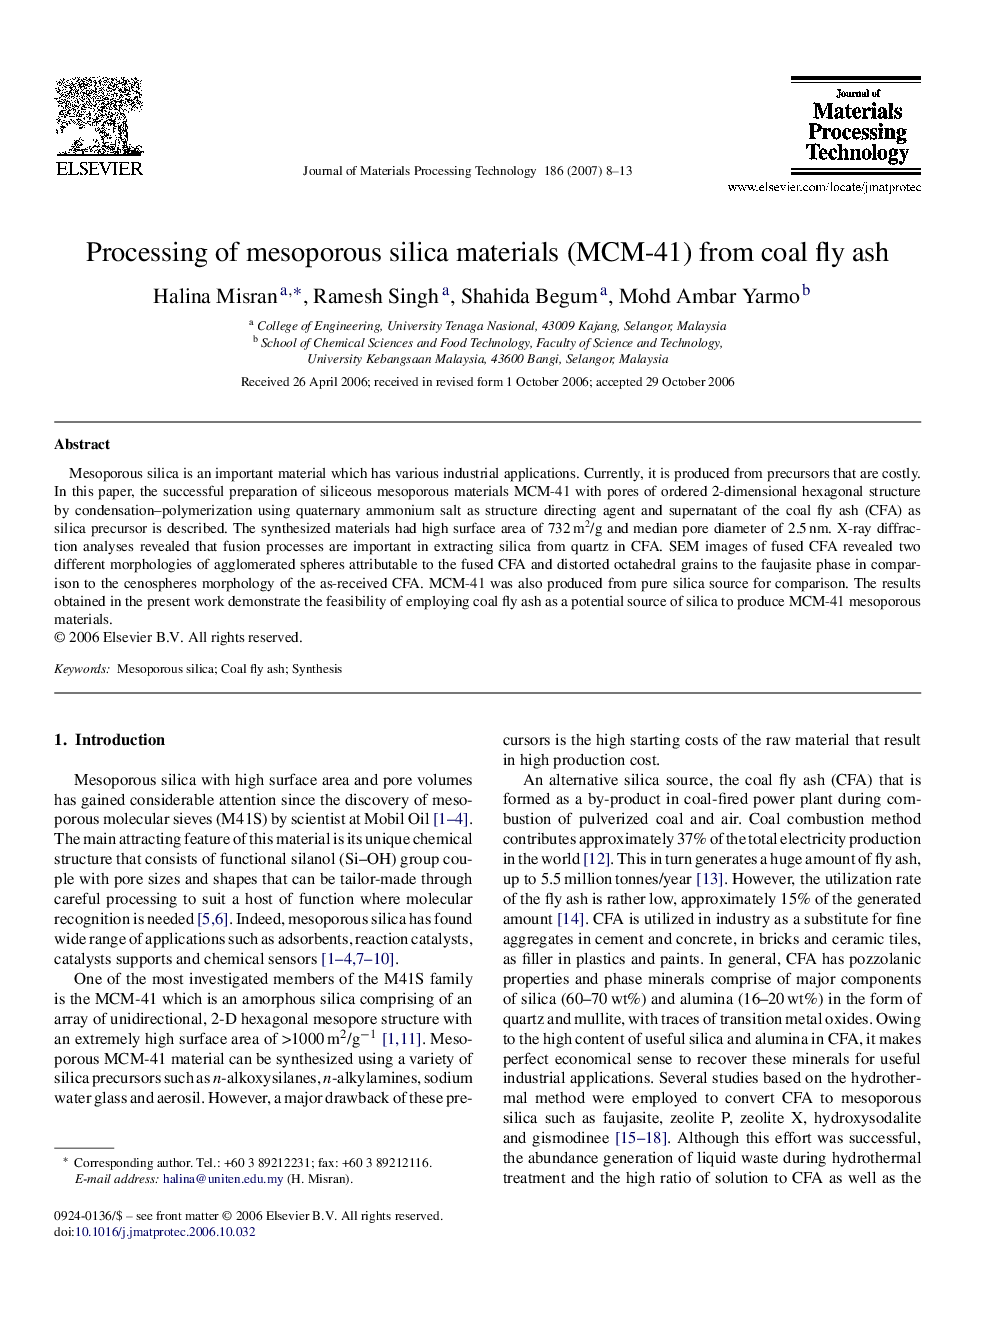 Processing of mesoporous silica materials (MCM-41) from coal fly ash